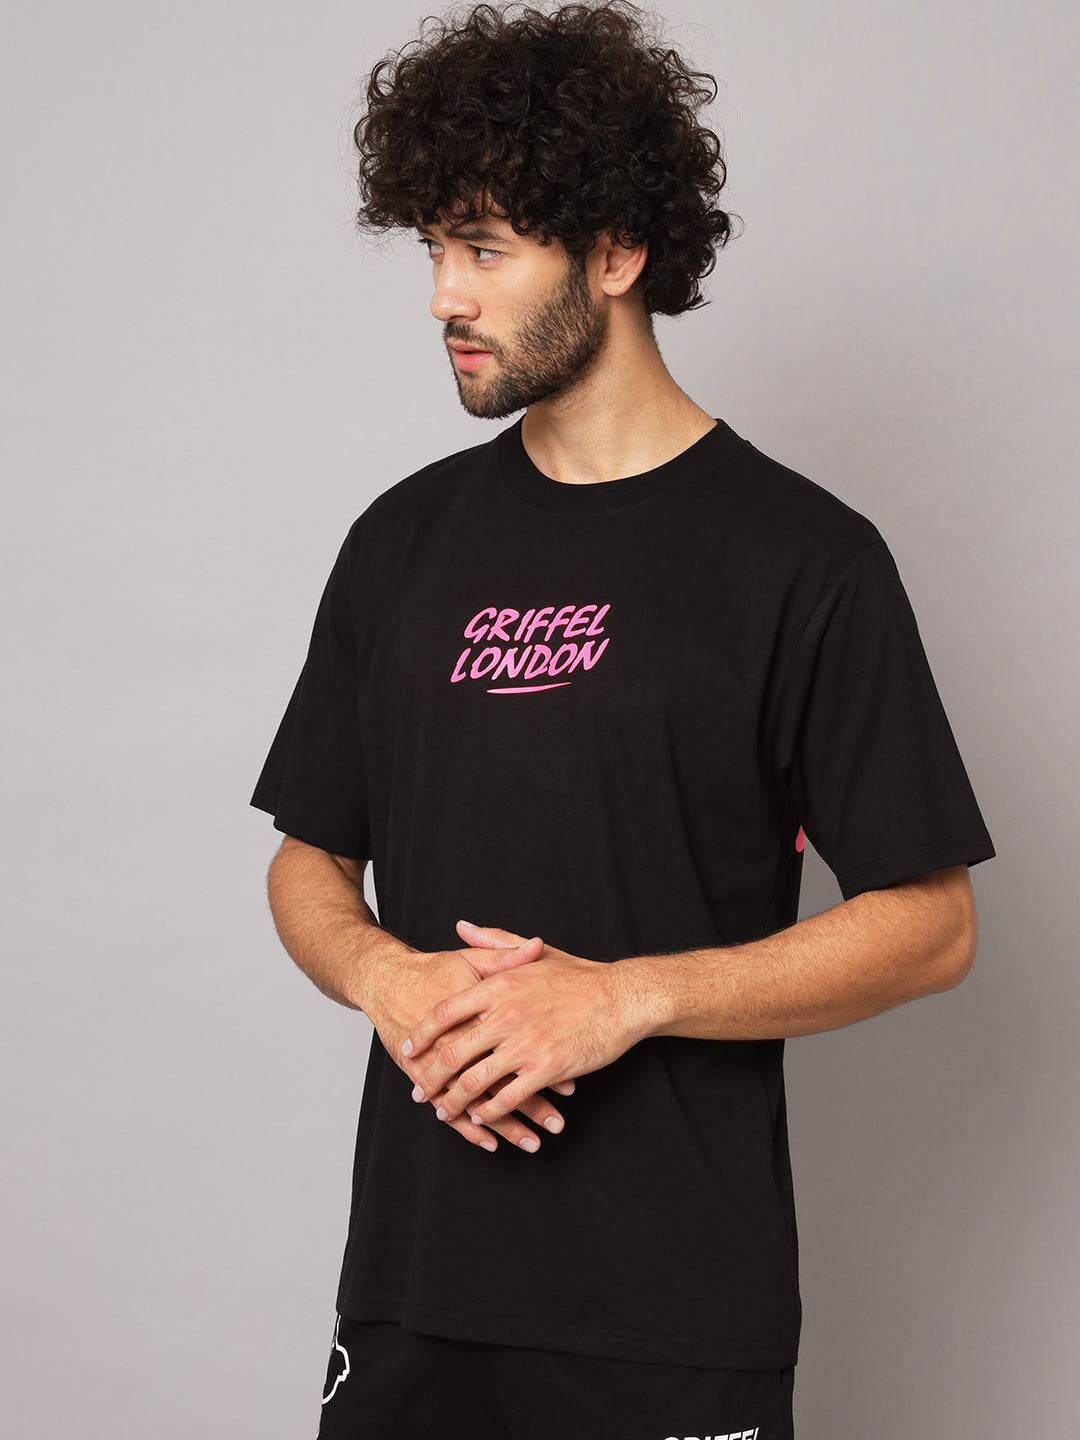 GRIFFEL Men Printed Black NO TIME FOR ROMANCE Oversized T-shirt - griffel